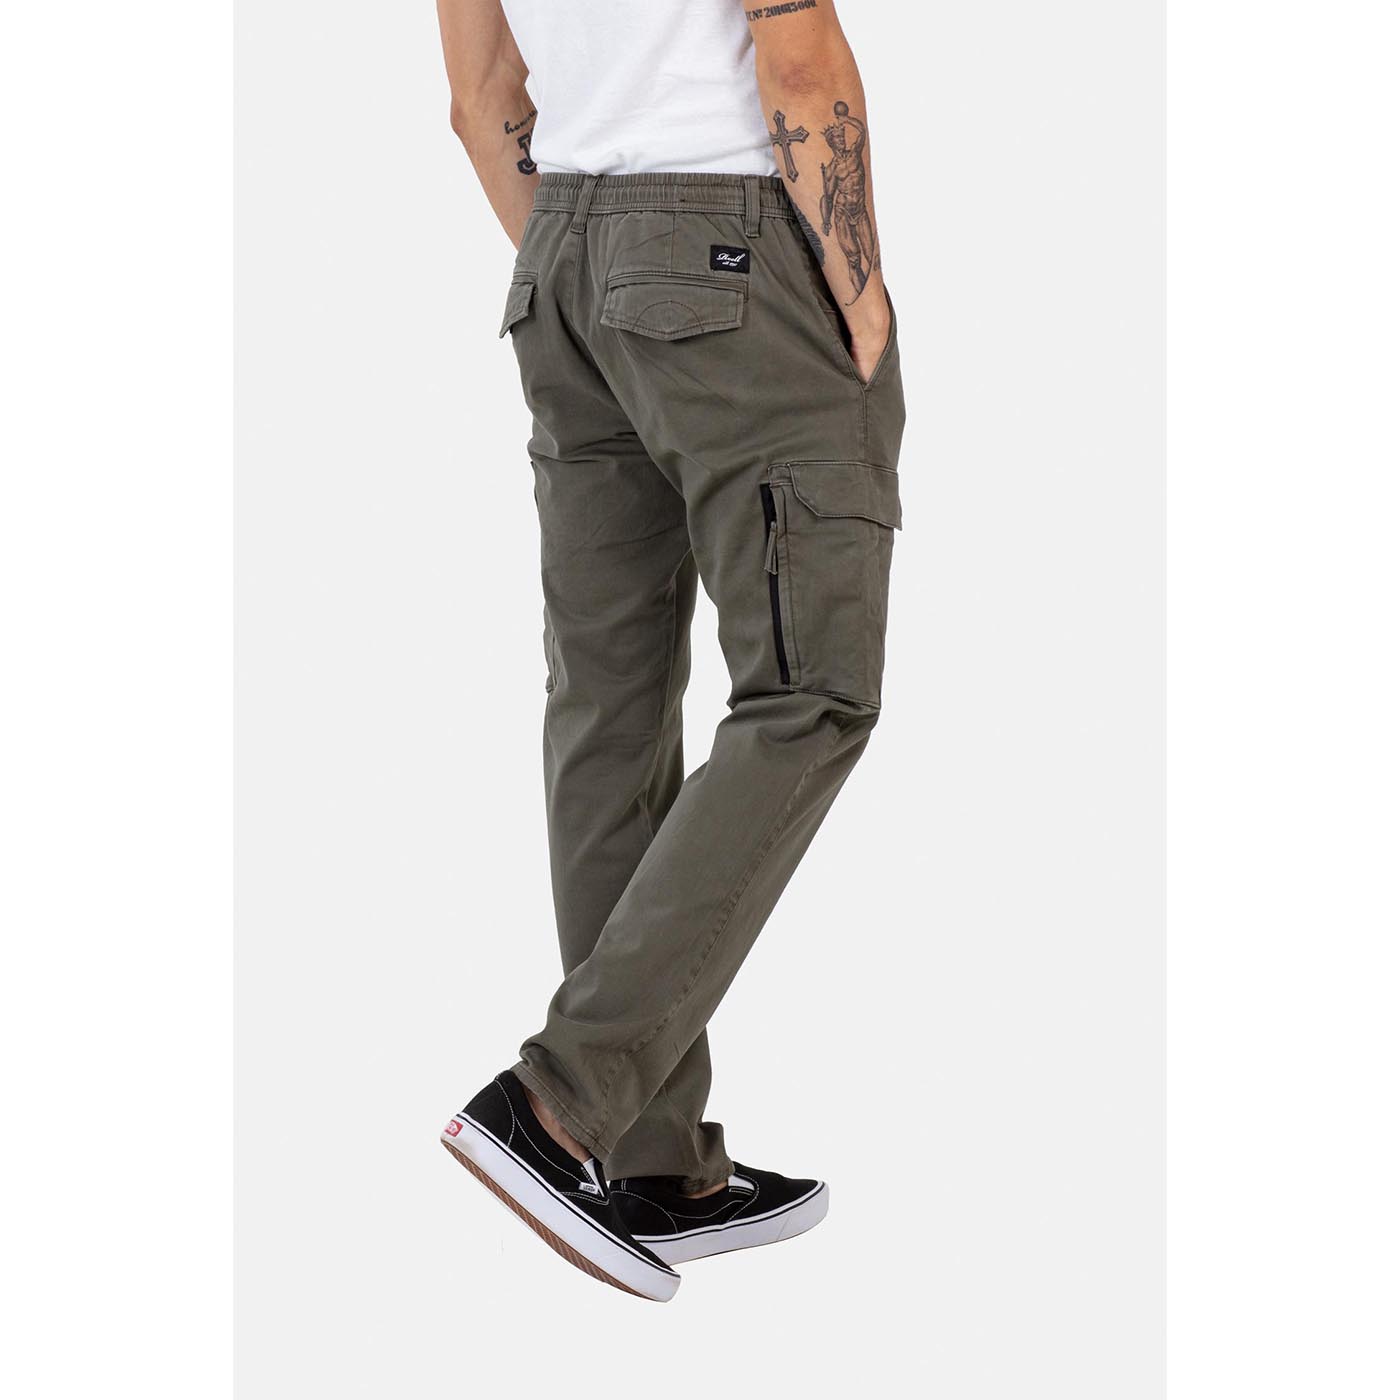 Reell Jeans Reflex Easy Cargo Pant Olive